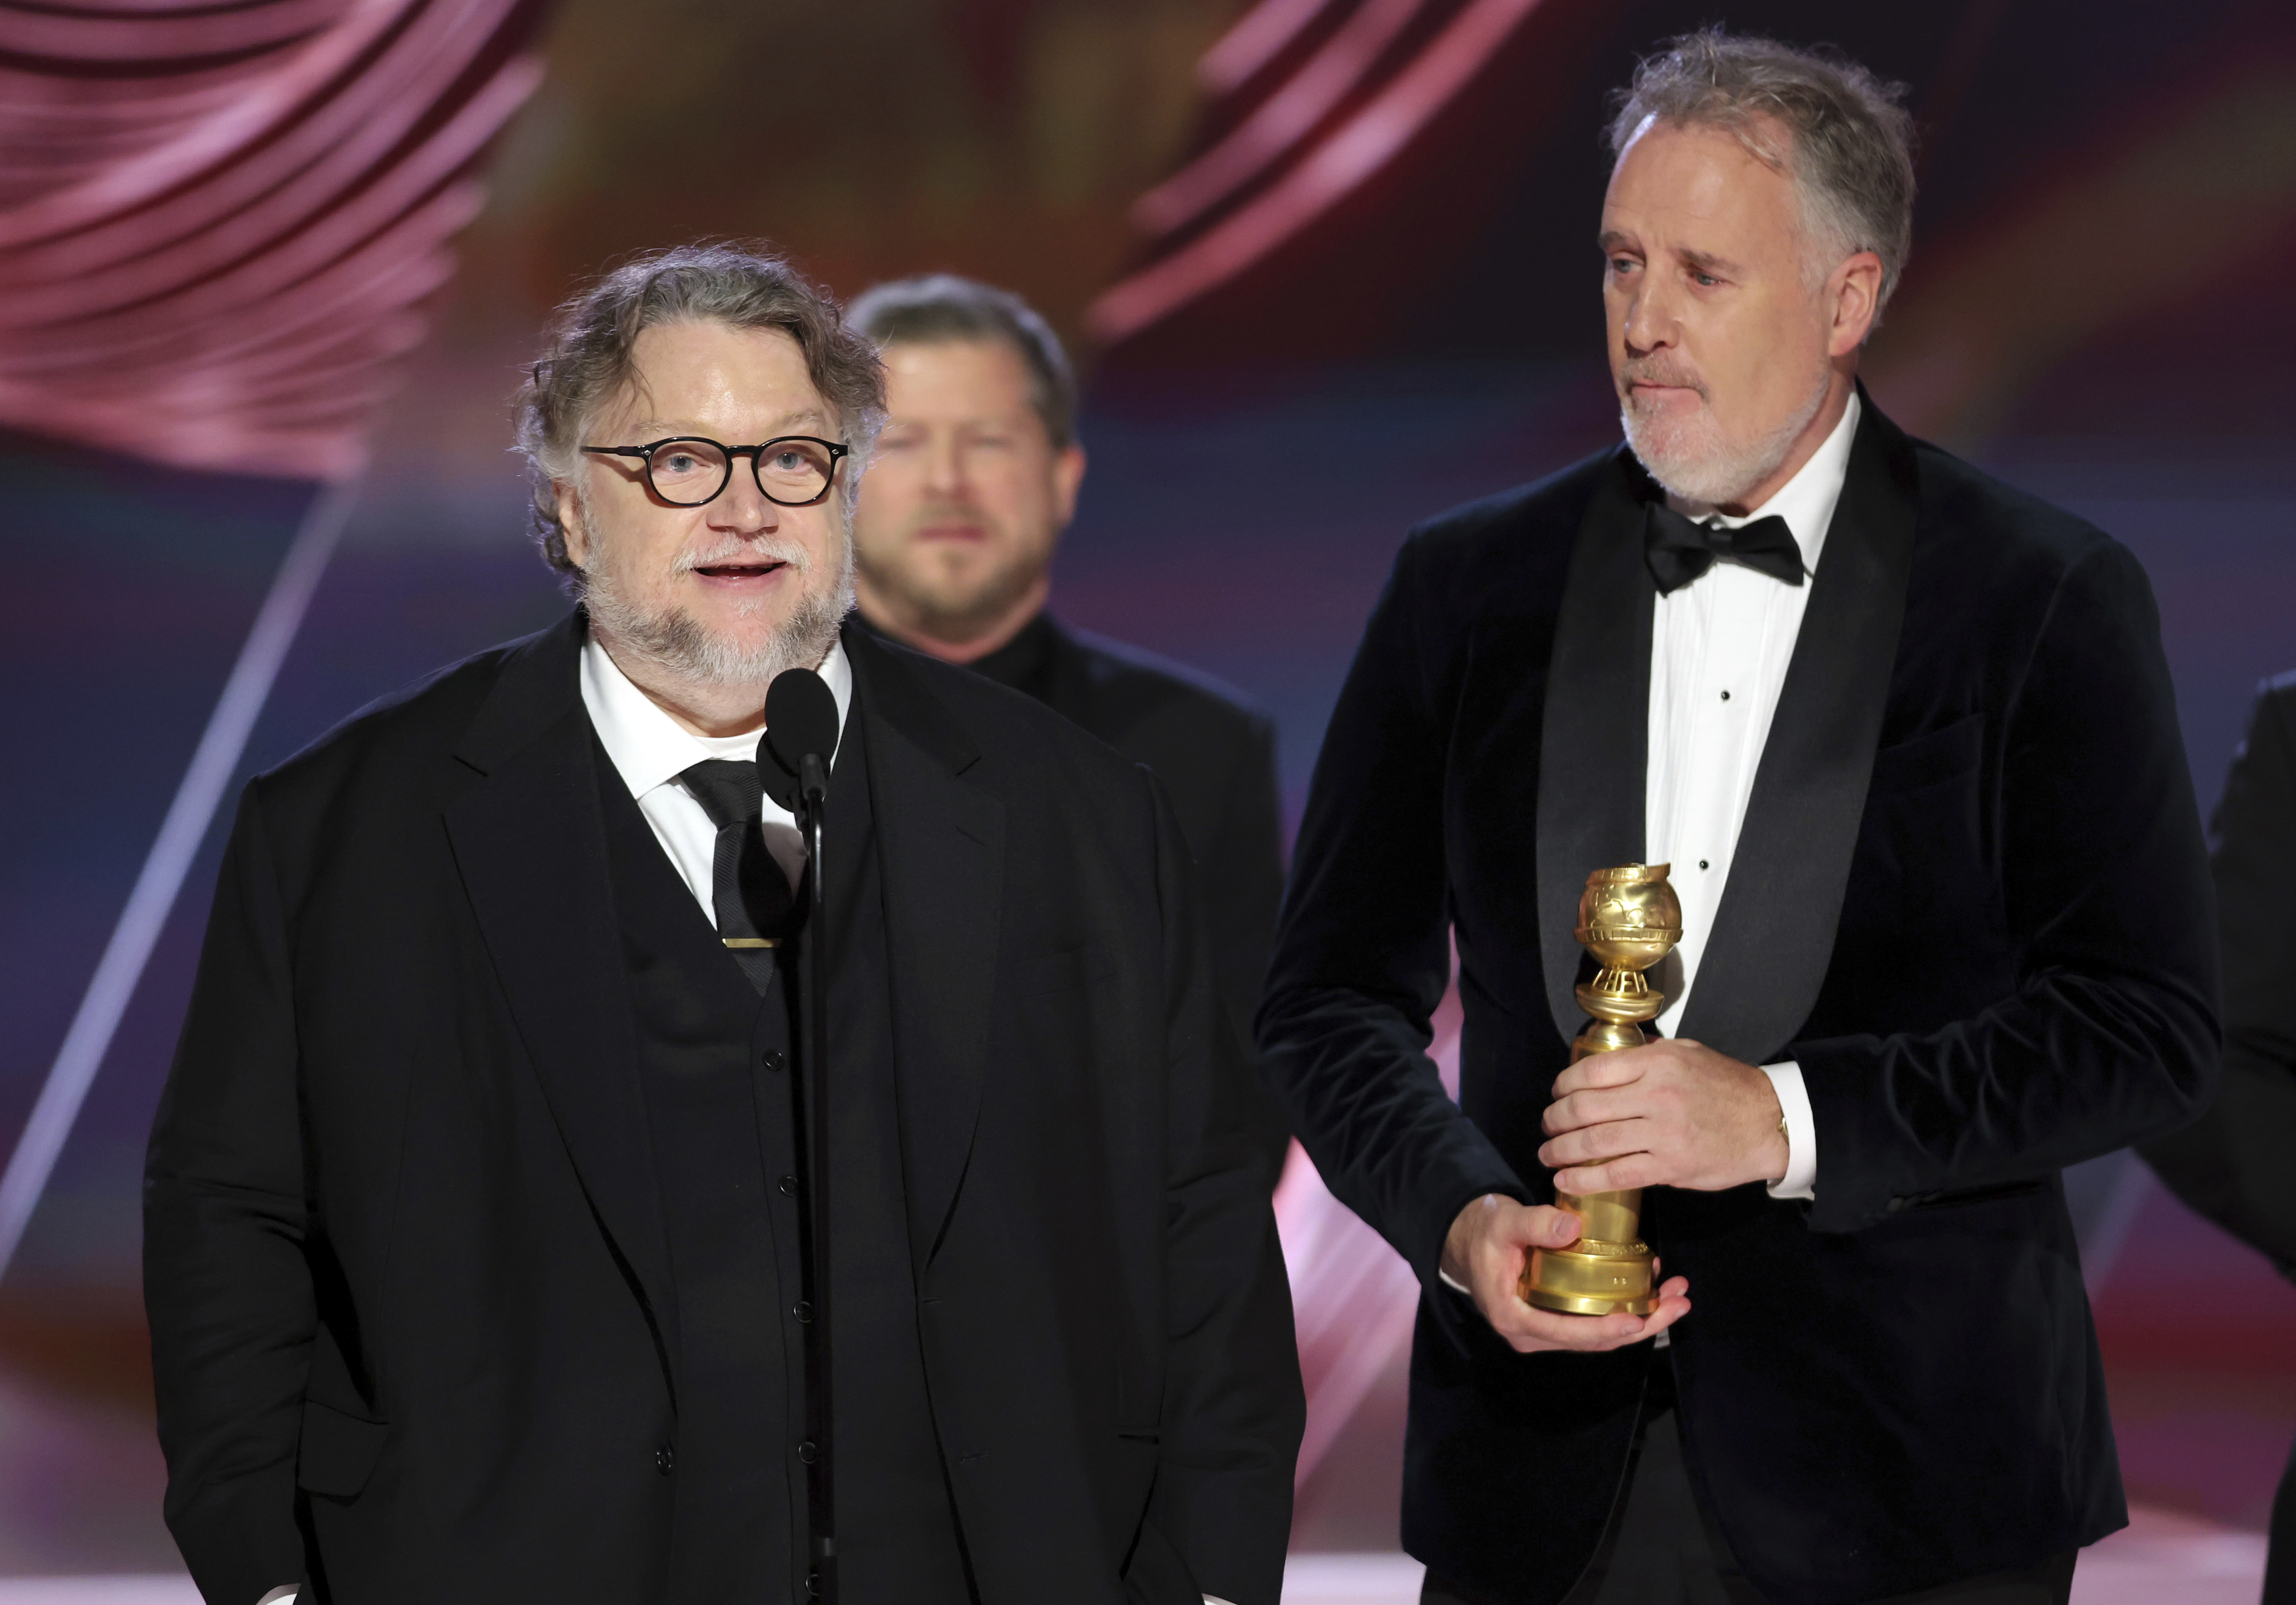 In this image provided by NBC, Guillermo del Toro, left, and Mark Gustafson receive the award for Best Animated Feature for "Guillermo del Toro's Pinocchio" at the 80th Annual Golden Globe Awards at the Beverly Hilton Hotel on January 10, 2023, in Beverly Hills, California.  (Rich Polk/NBC via AP)